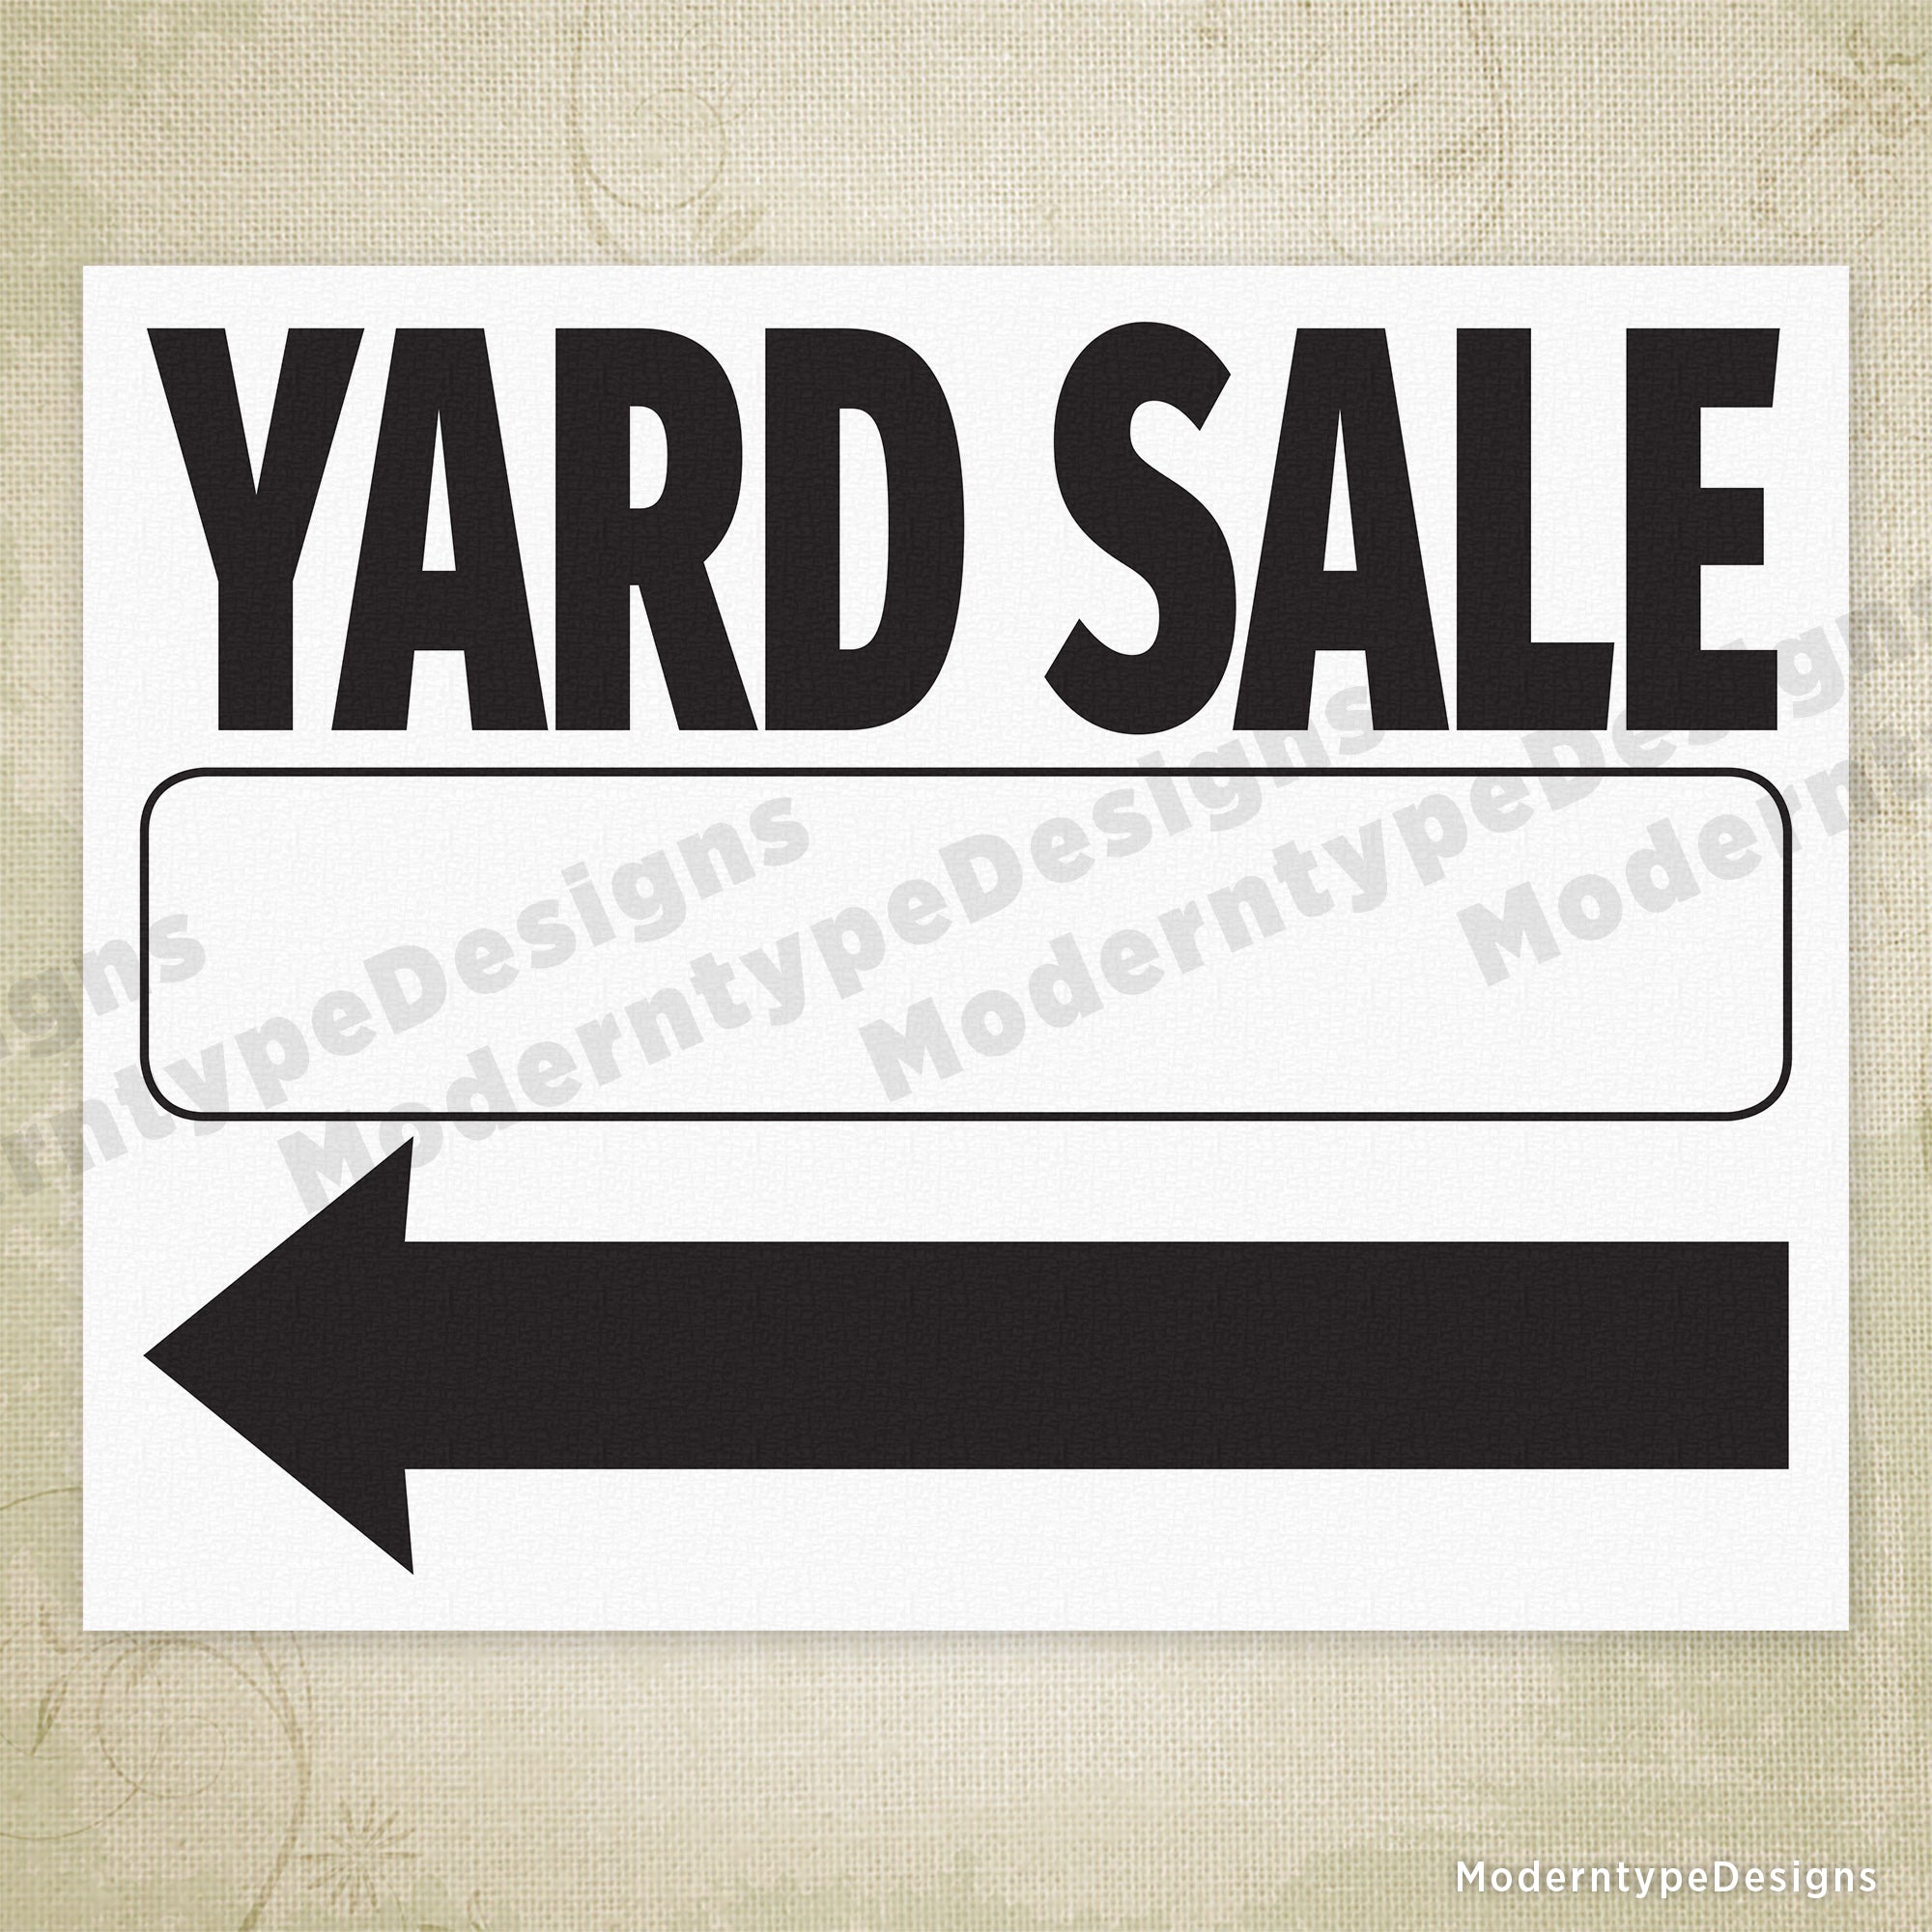 Yard Sale Flyer Printable Sign (Left & Right Arrows)